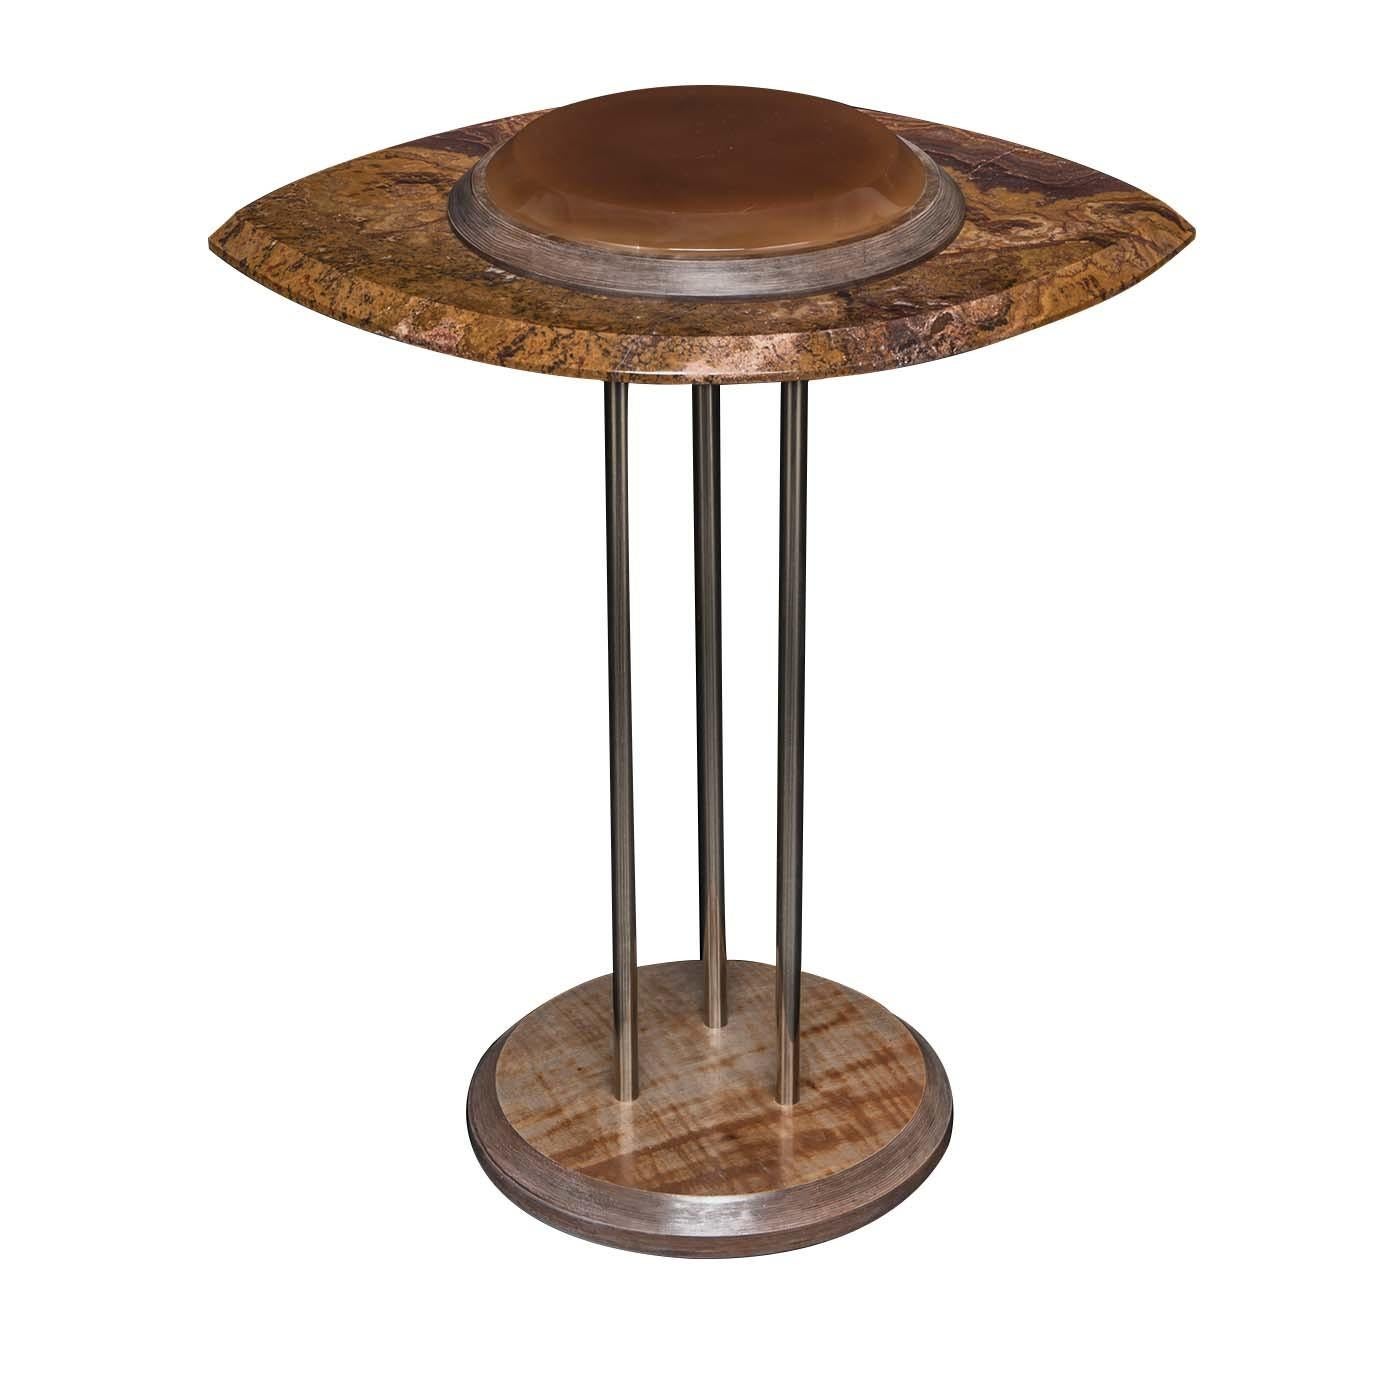 The Eye Side Table in Brown and Orange